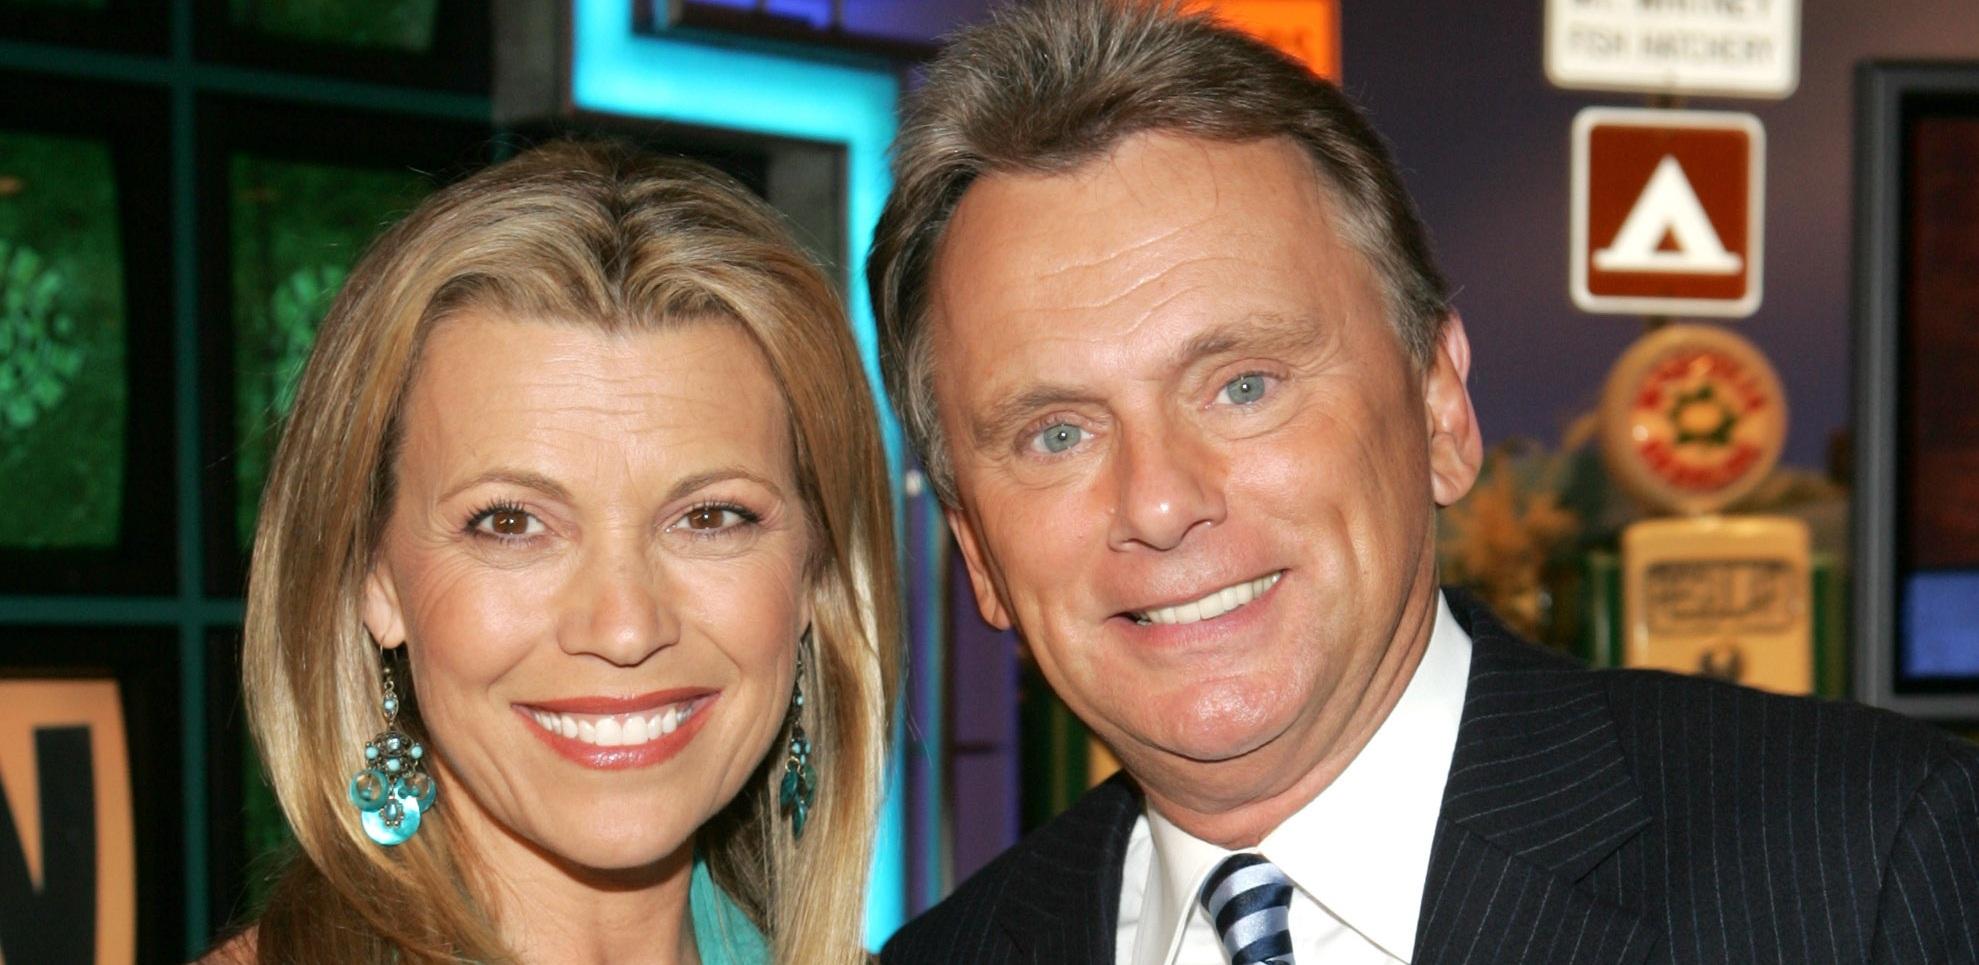  Vanna White, Co-Host of "Wheel of Fortune" and Pat Sajak, Host of "Wheel of Fortune" 